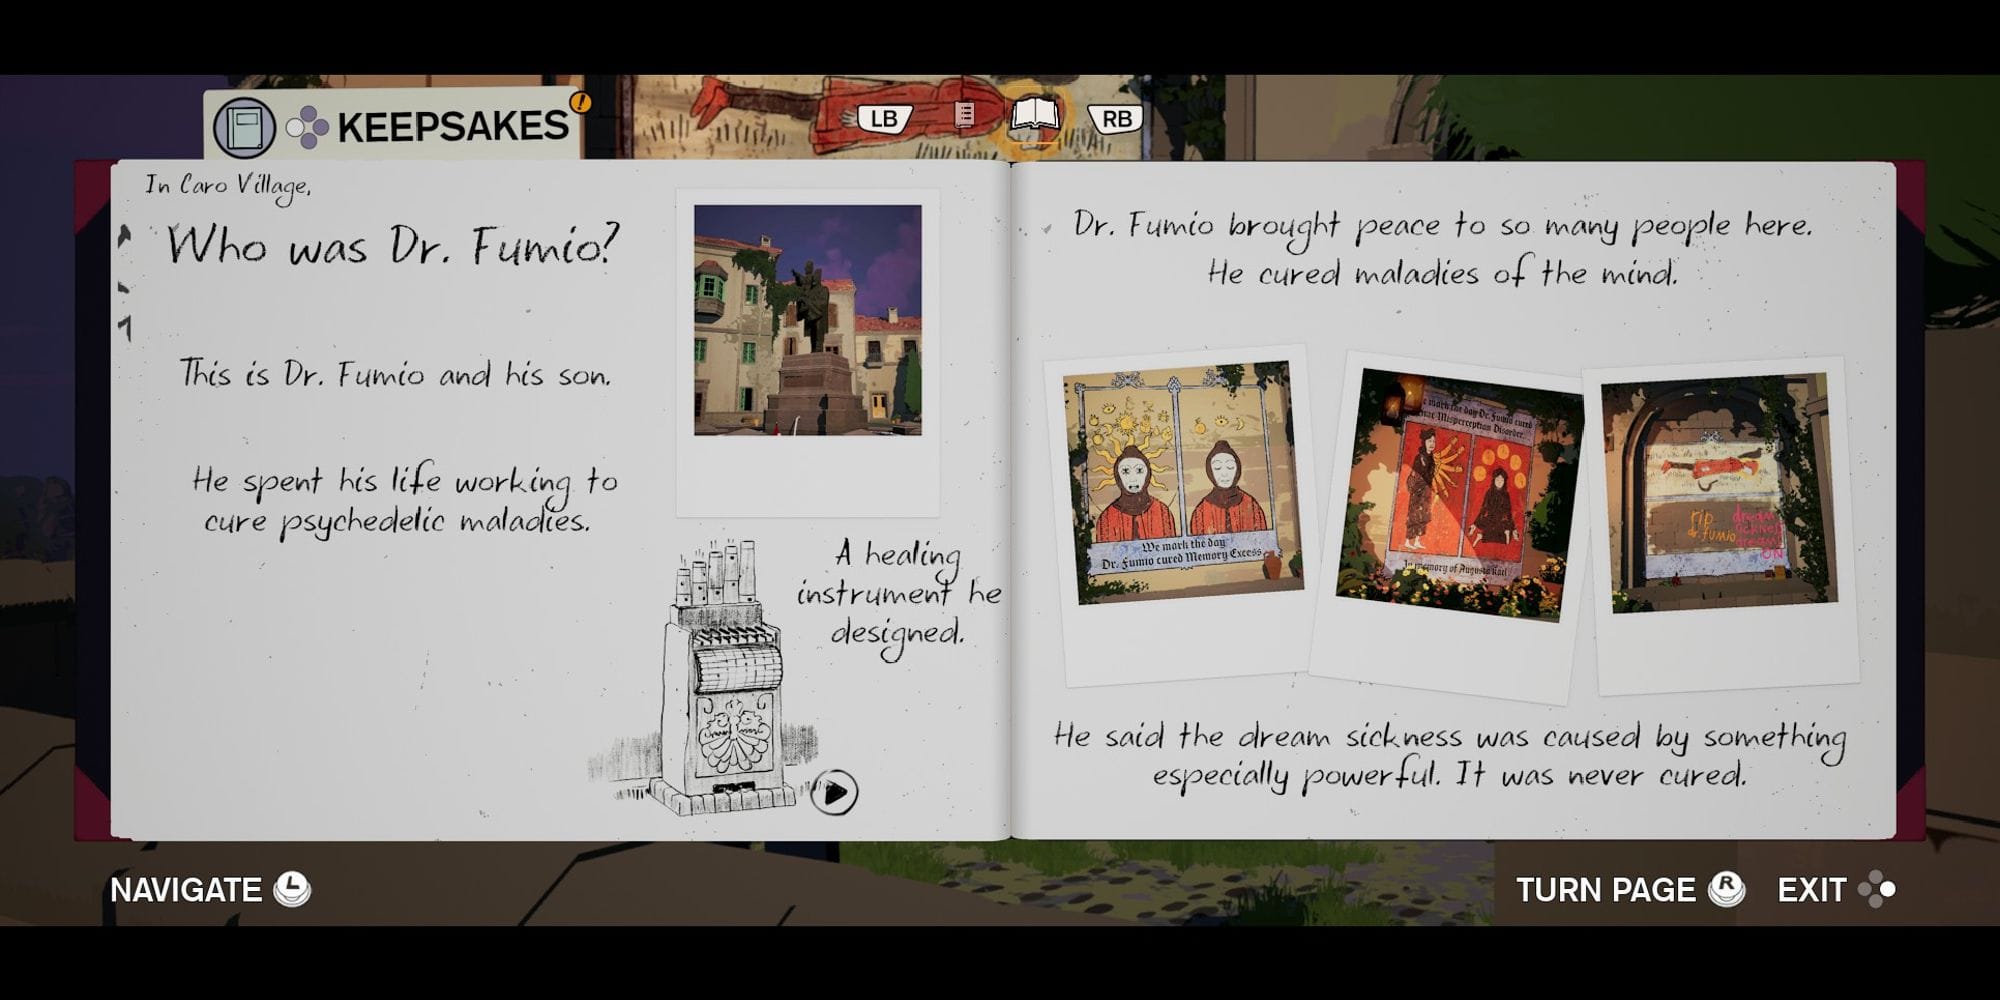 Diary from the game with notes and photos the player can take to place there